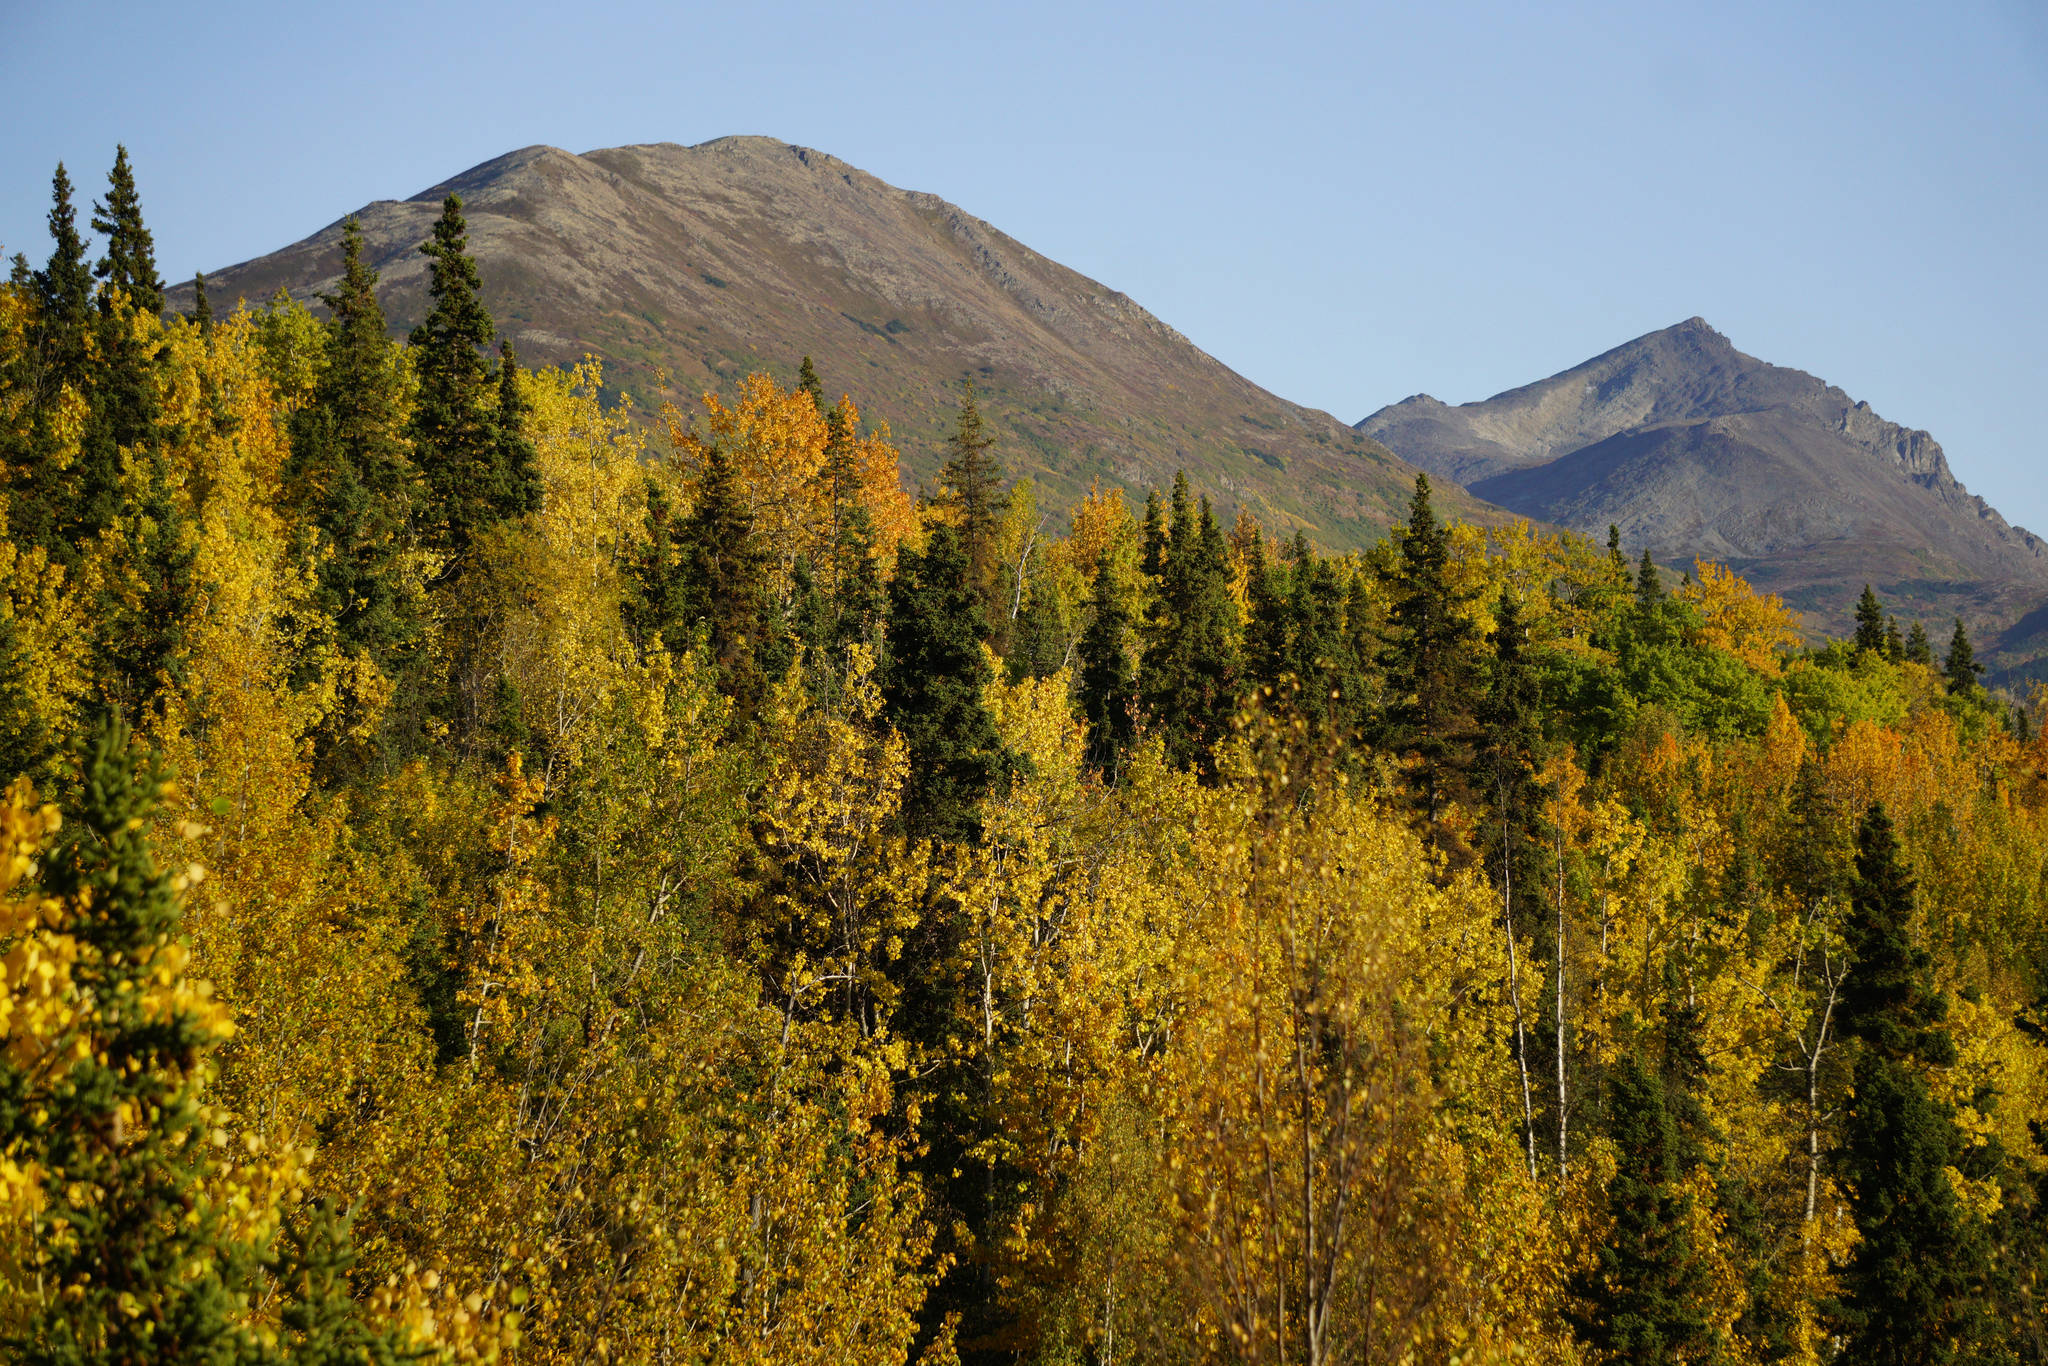 Birch and aspen trees offer a splash of fall color by Hidden Lake looking toward Skilak Lake in the Kenai National Wildlife Refuge on Saturday, Sept. 29, 2018, near Sterling, Alaska. (Photo by Michael Armstrong/Homer News)